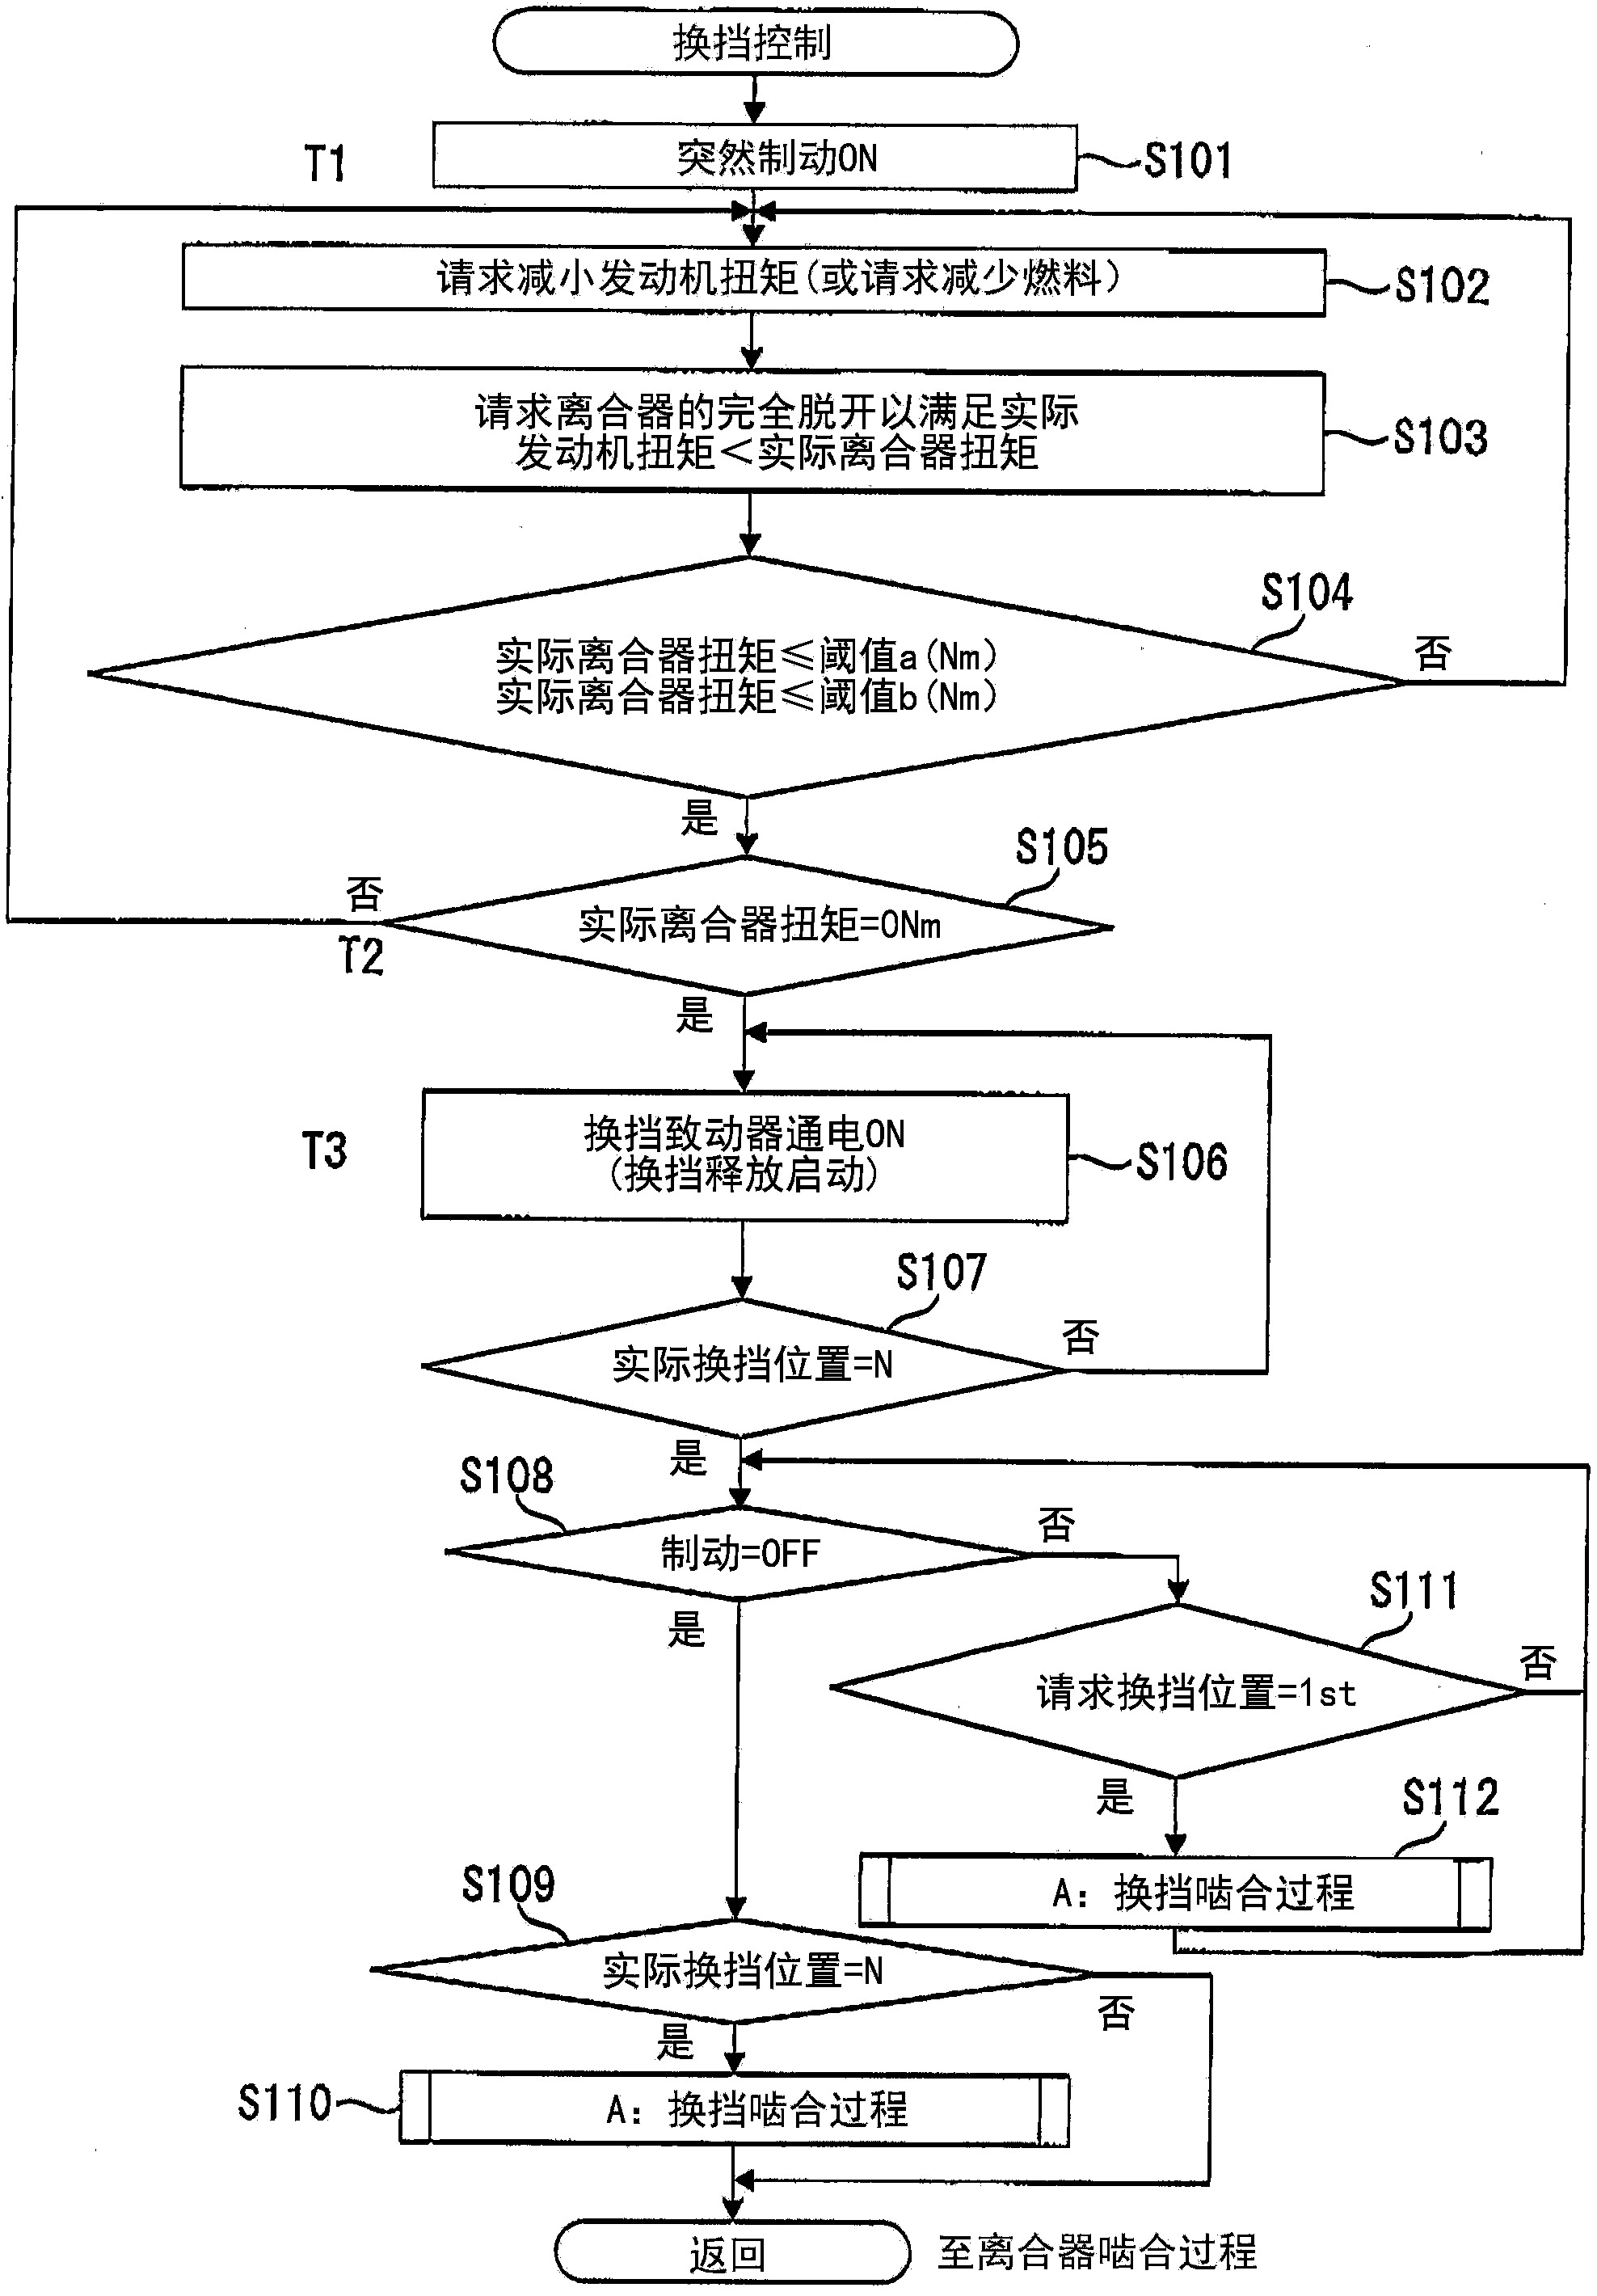 Automated transmission control apparatus